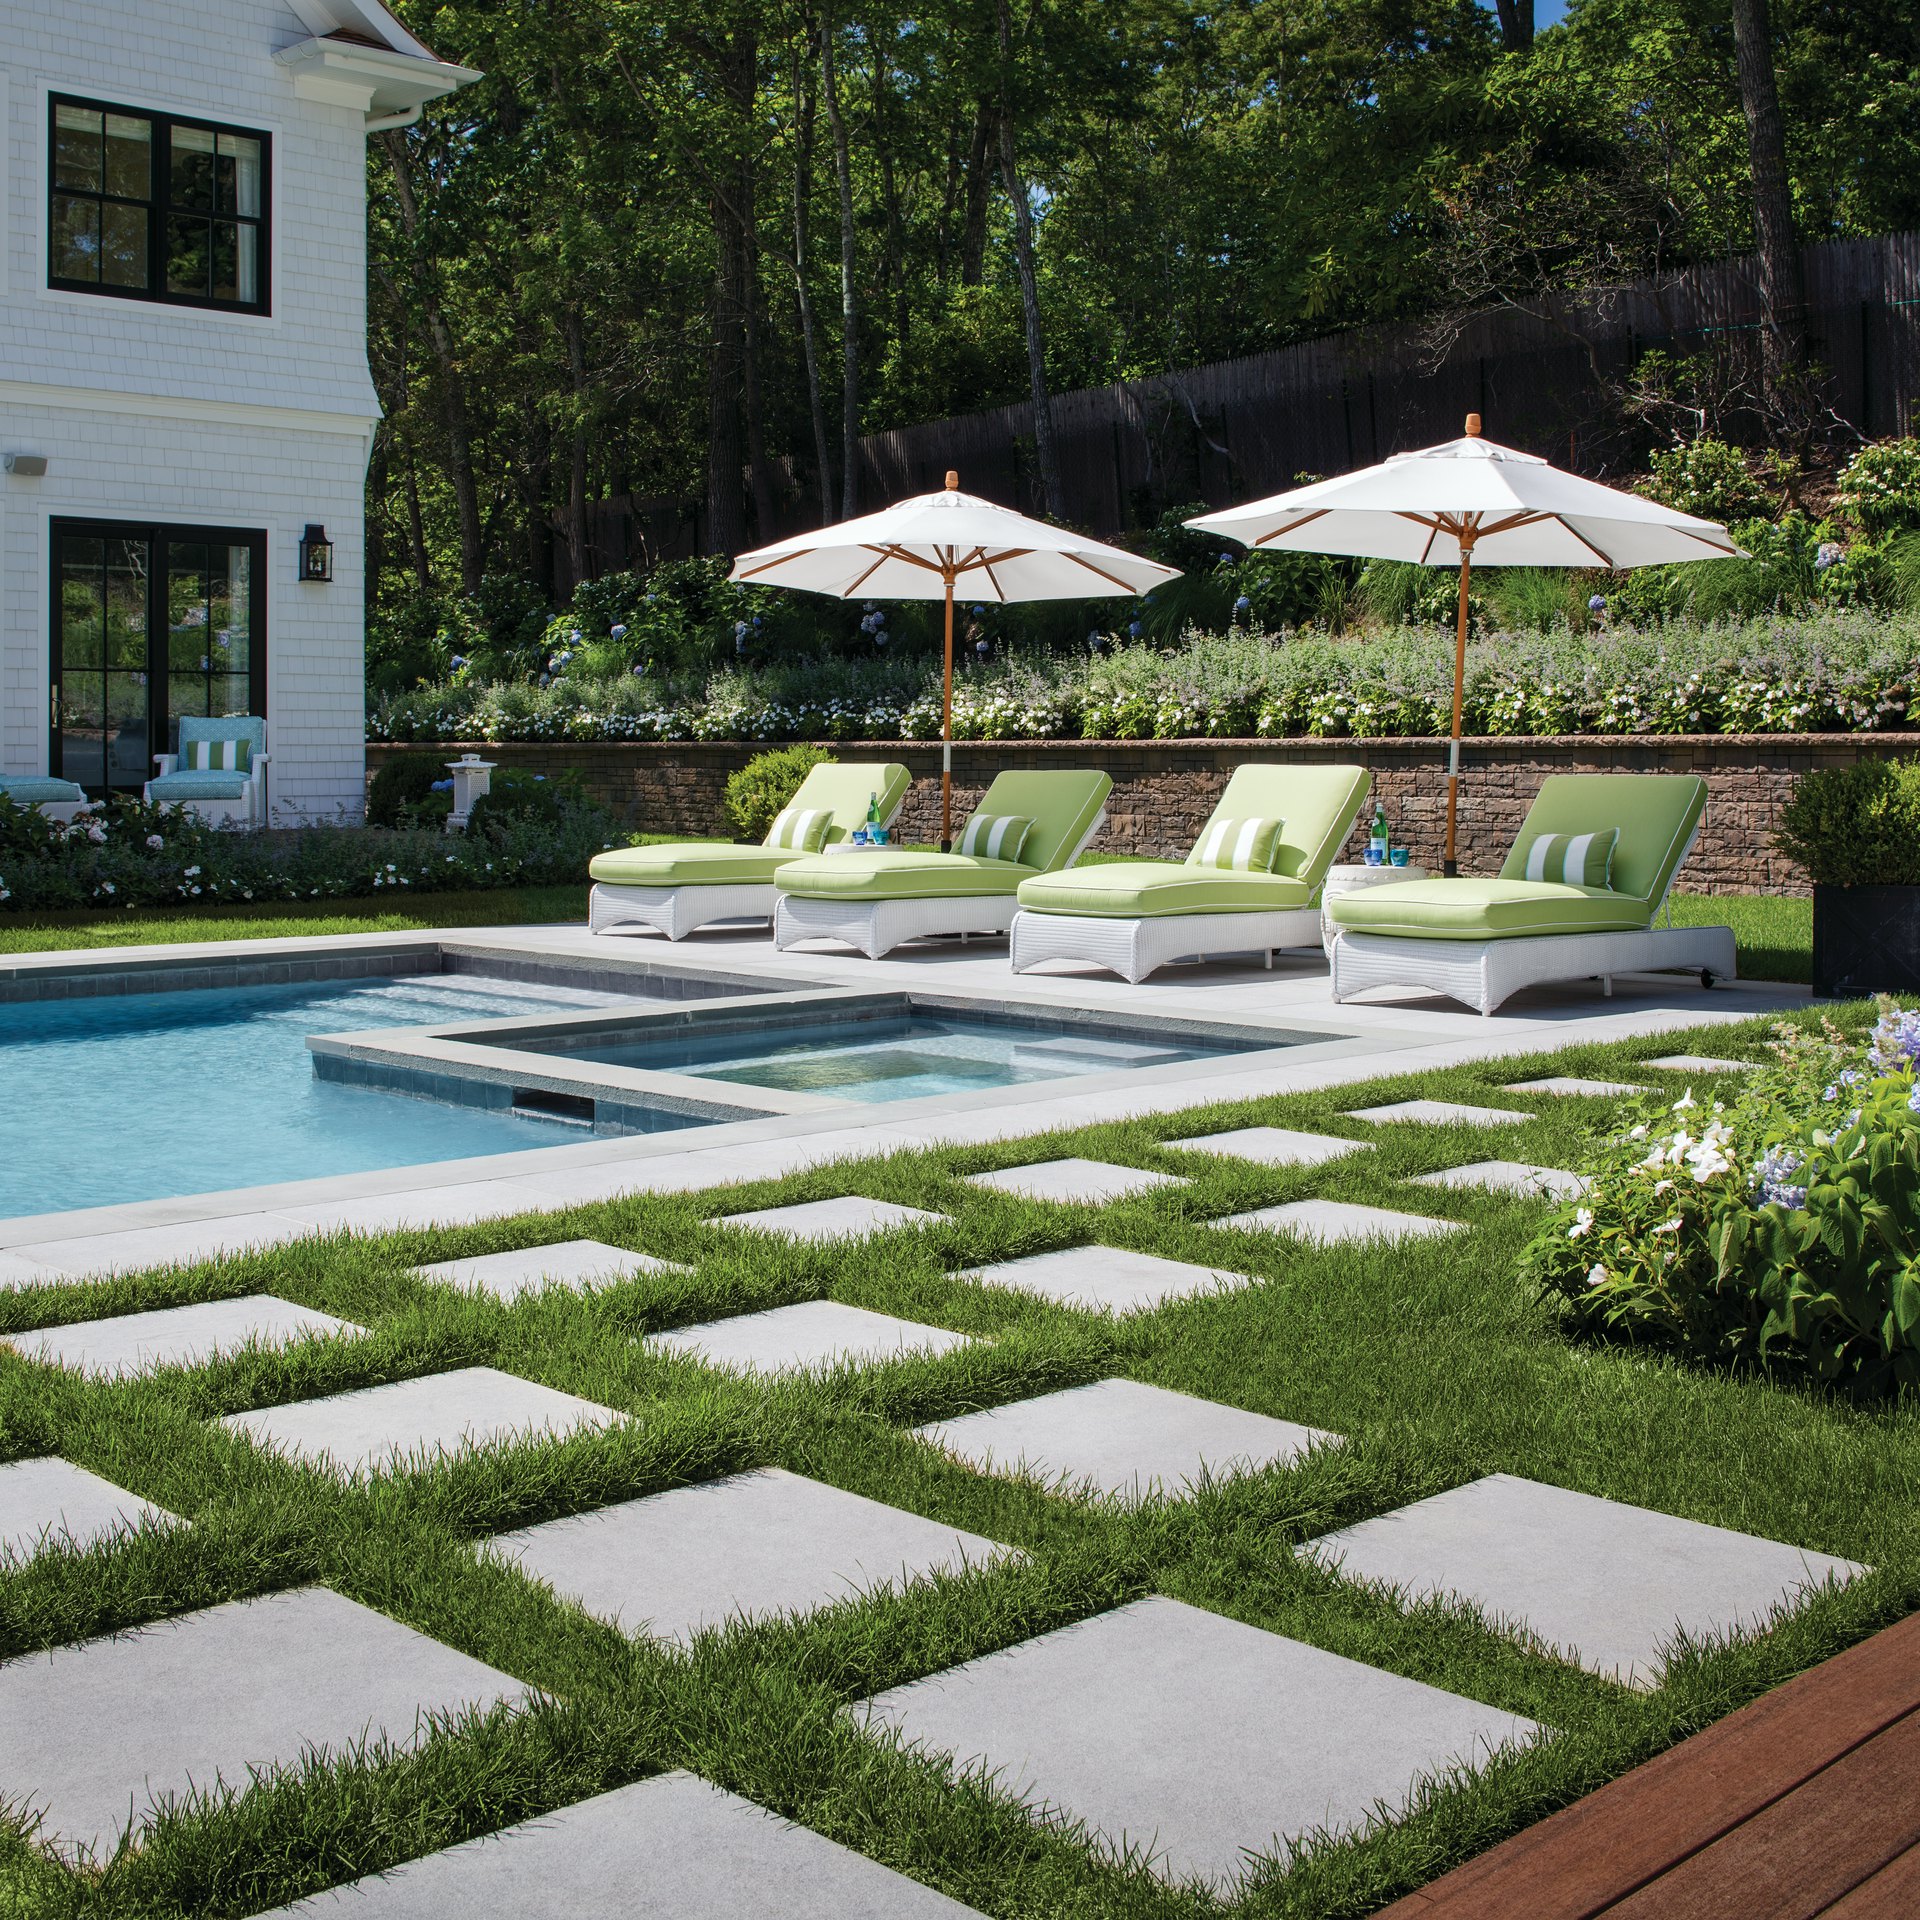 There are many different options when it comes to pavers to create a unique outdoor space.